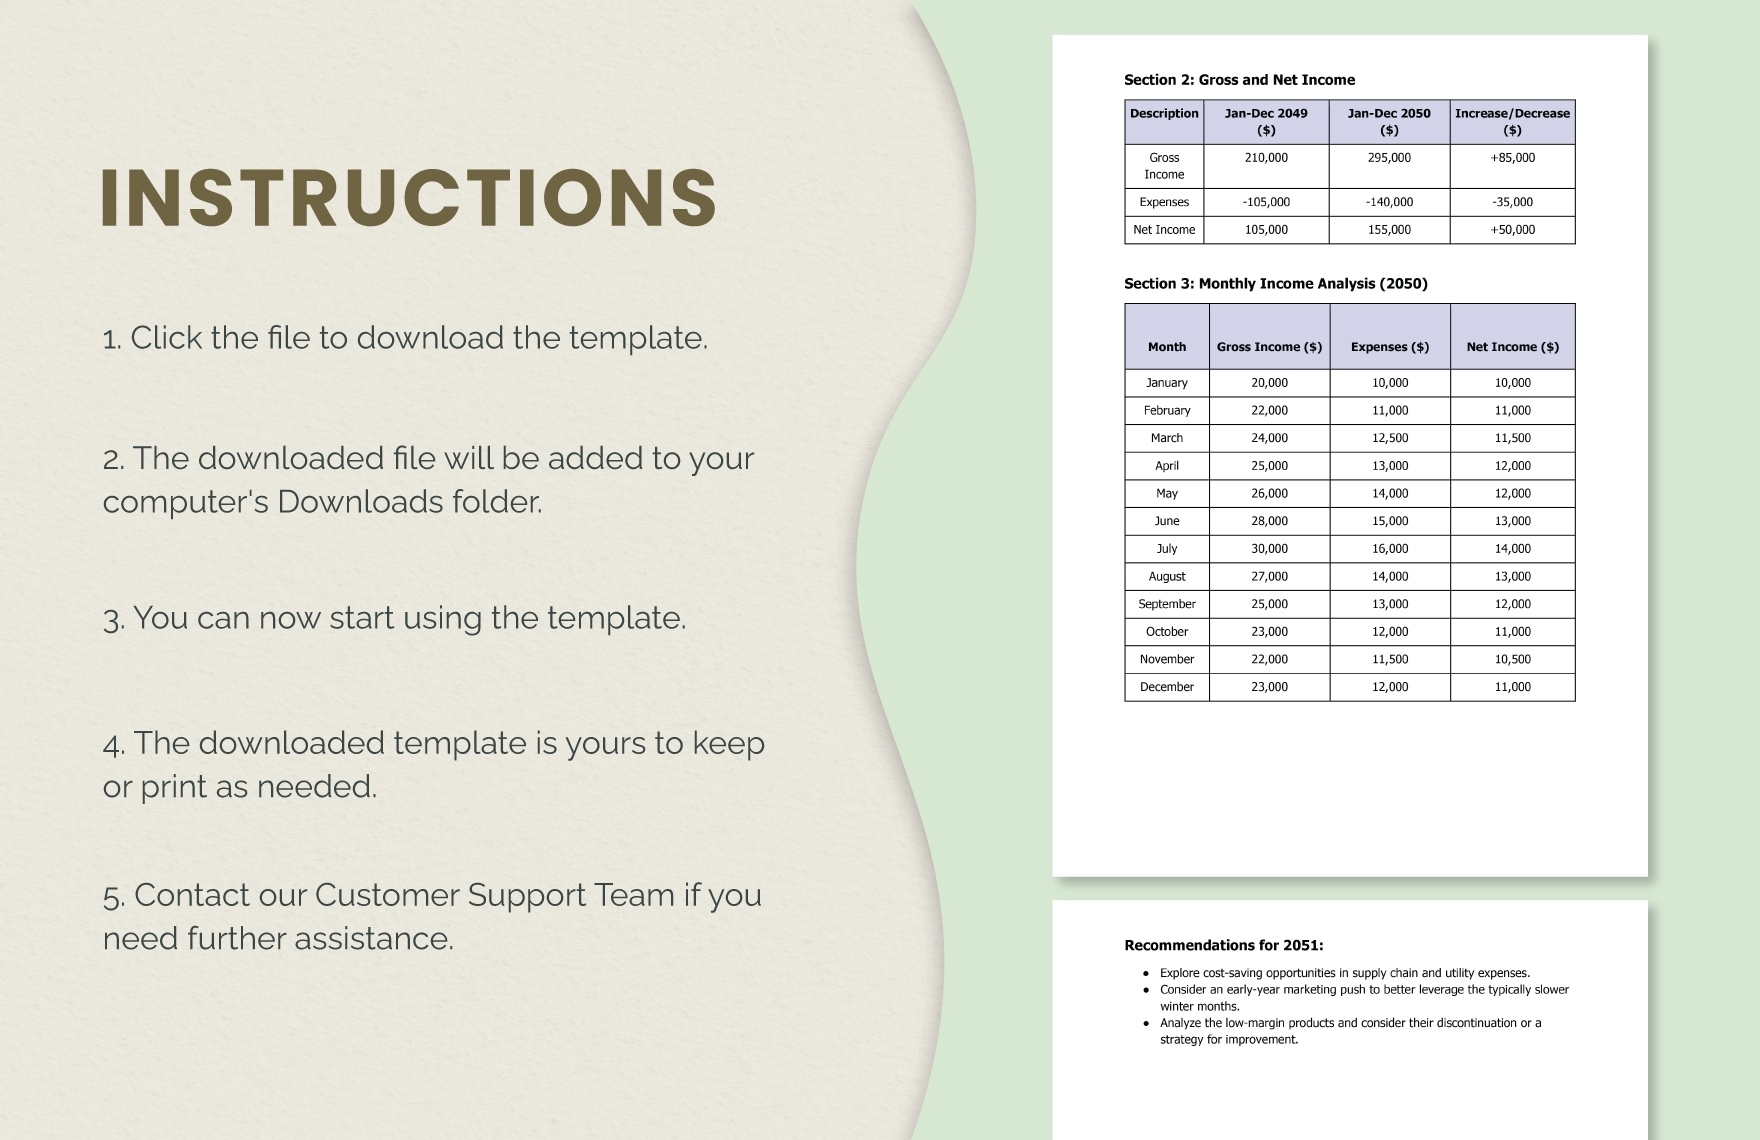 Business Income Worksheet Template